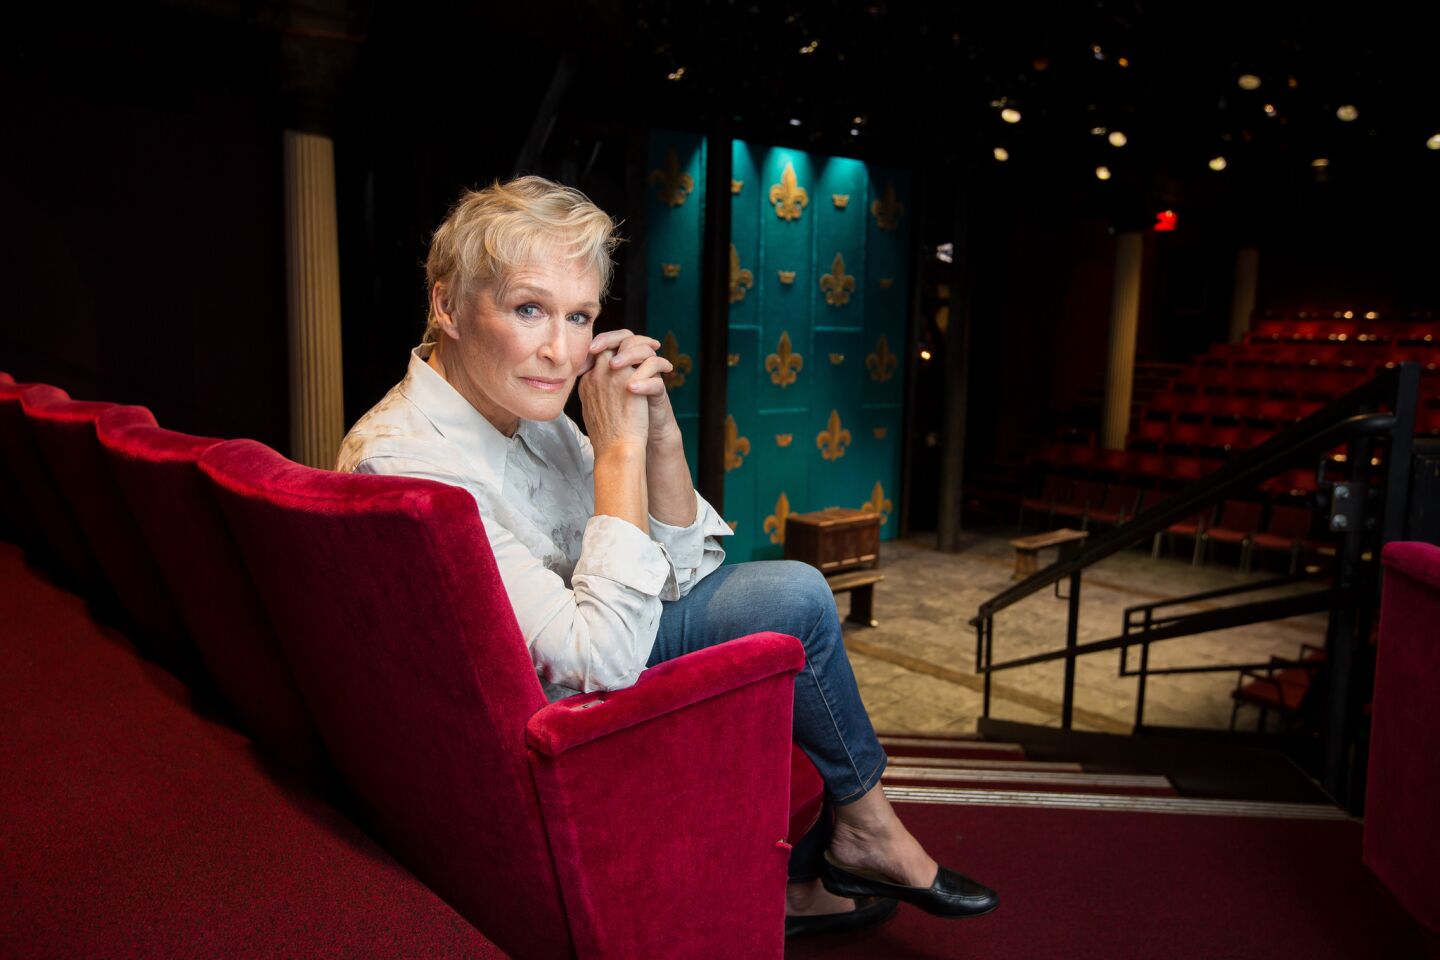 Claiming her seventh Oscar nomination, and fourth in this category, Glenn Close has yet to take home the award. She already won a Golden Globe, her first for a movie performance, and is also nominated by SAG and BAFTA for her work, which initially premiered at the 2017 Toronto International Film Festival.